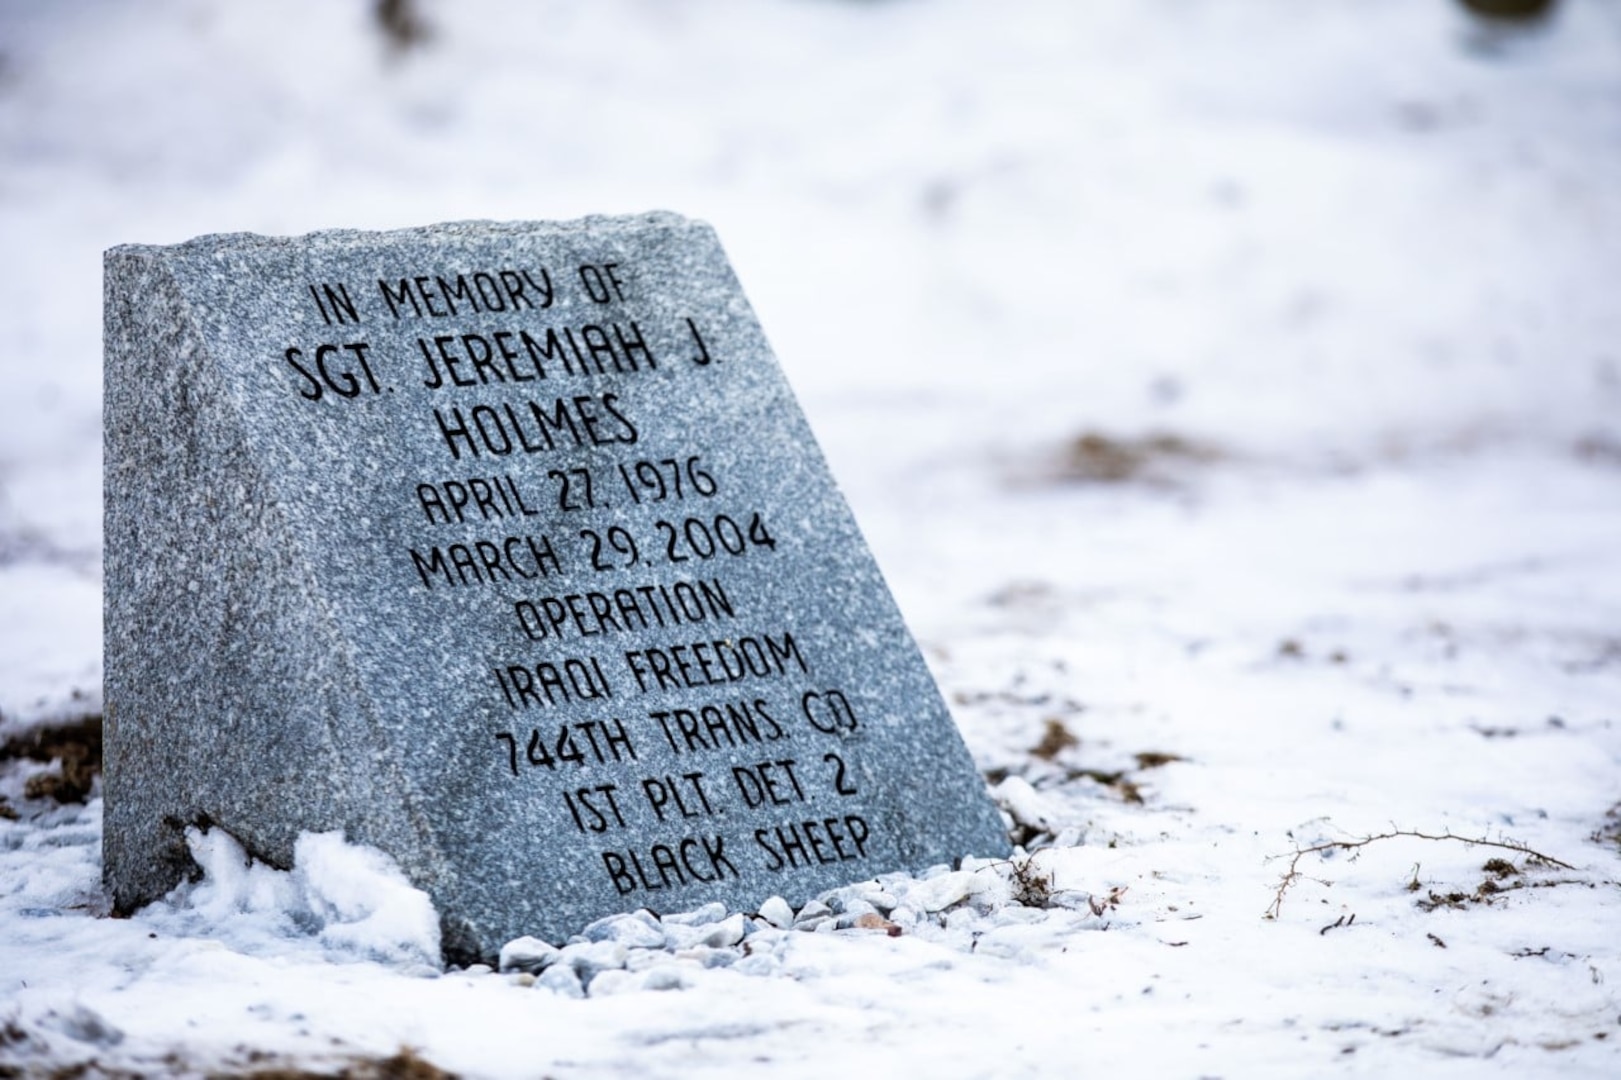 A granite marker honoring the service of Sgt. Jeremiah Holmes is rededicated at the Hillsborough armory March 5, 2022.